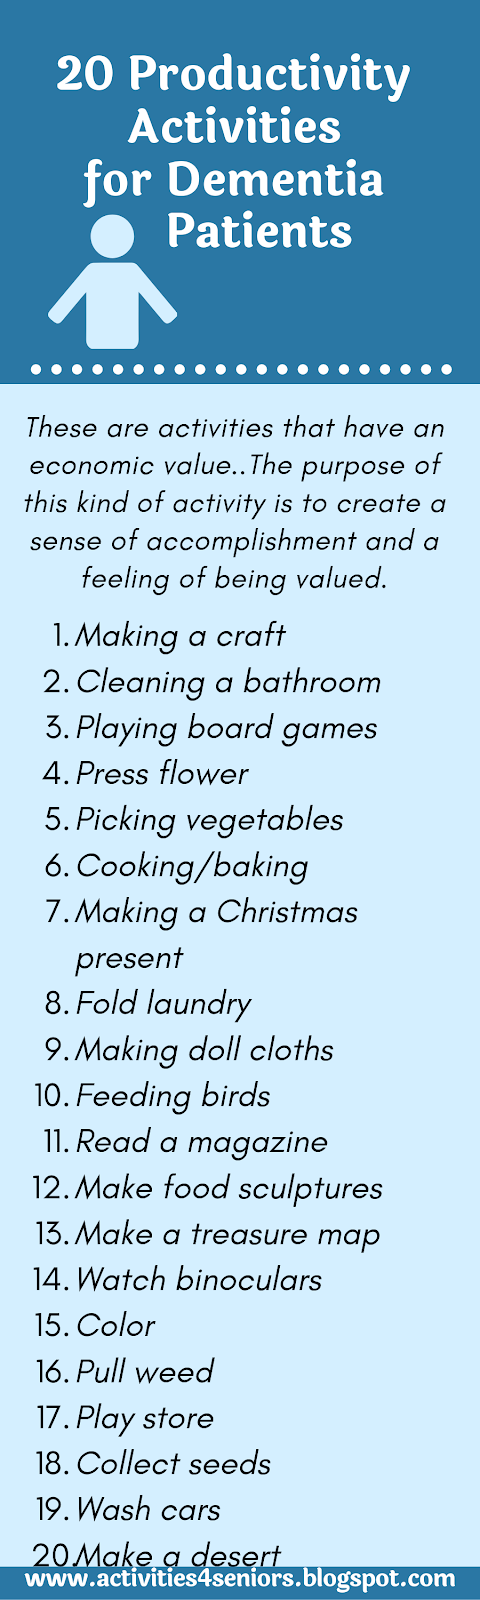 20 Activities for Dementia Patients at Home